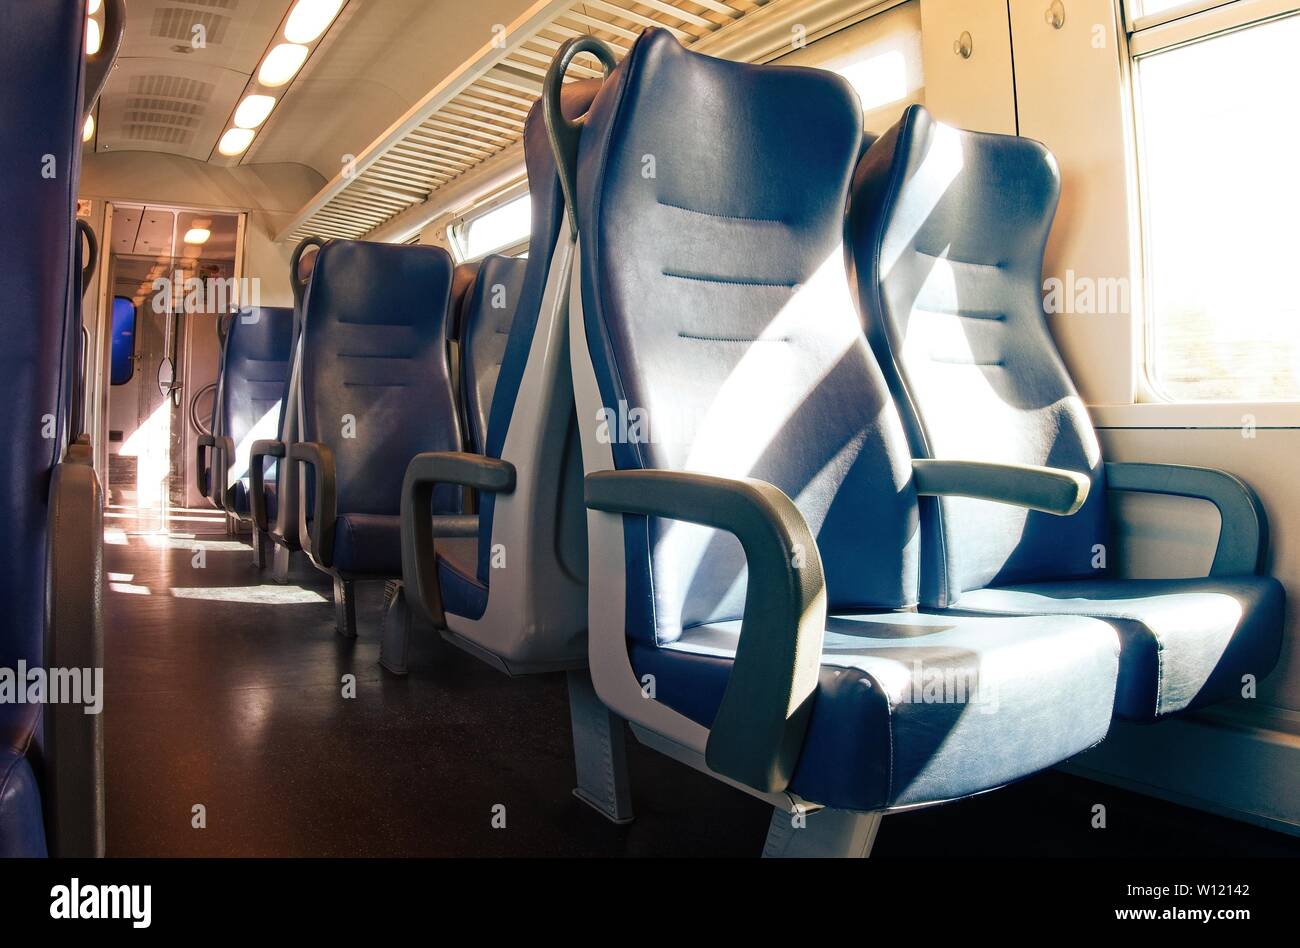 Interior of a passenger train with empty seats. Stock Photo